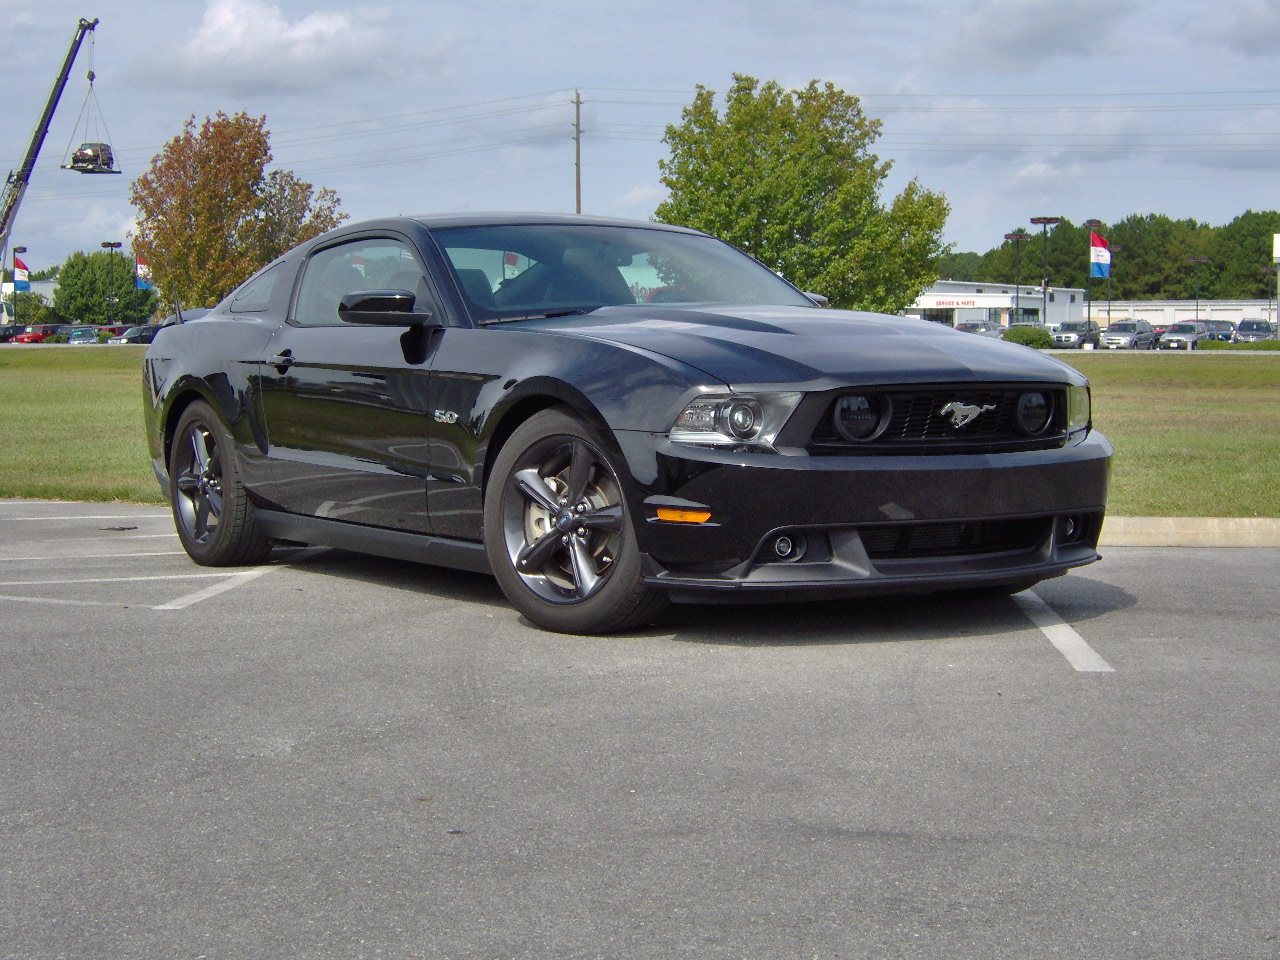 2011 Ford mustang 5.0 1/4 mile times #3